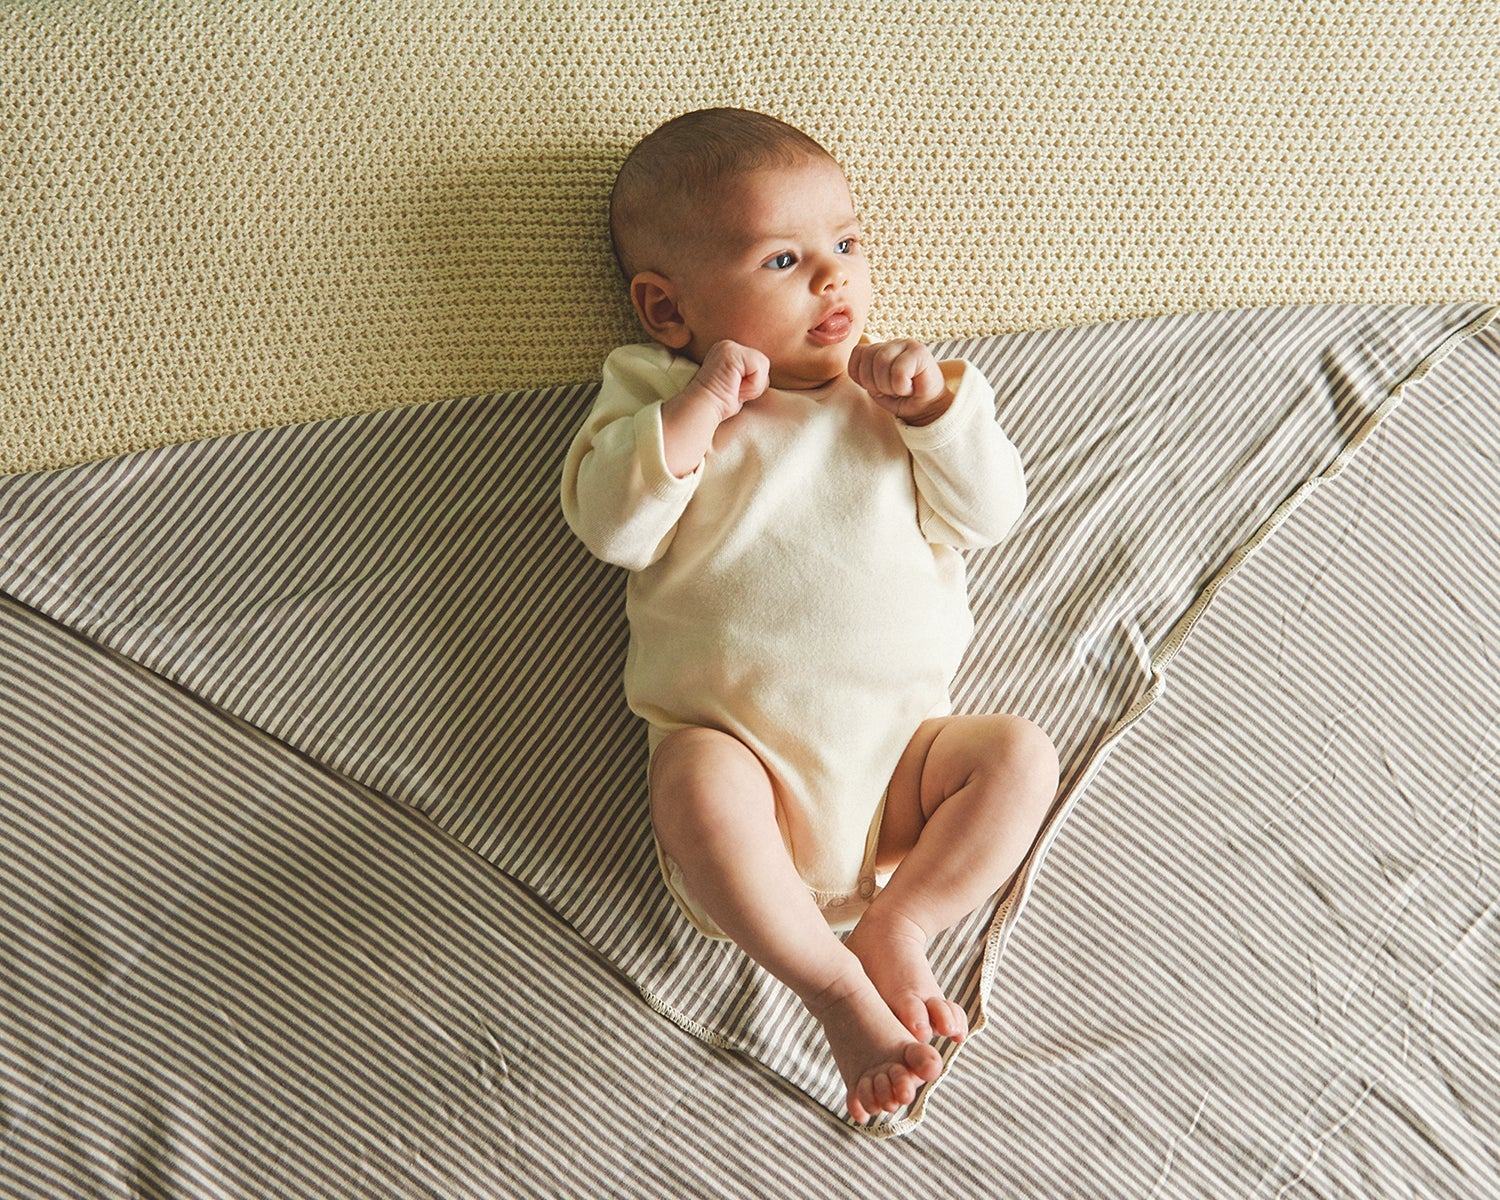 how to swaddle a baby, nighttime sleep, swaddle baby